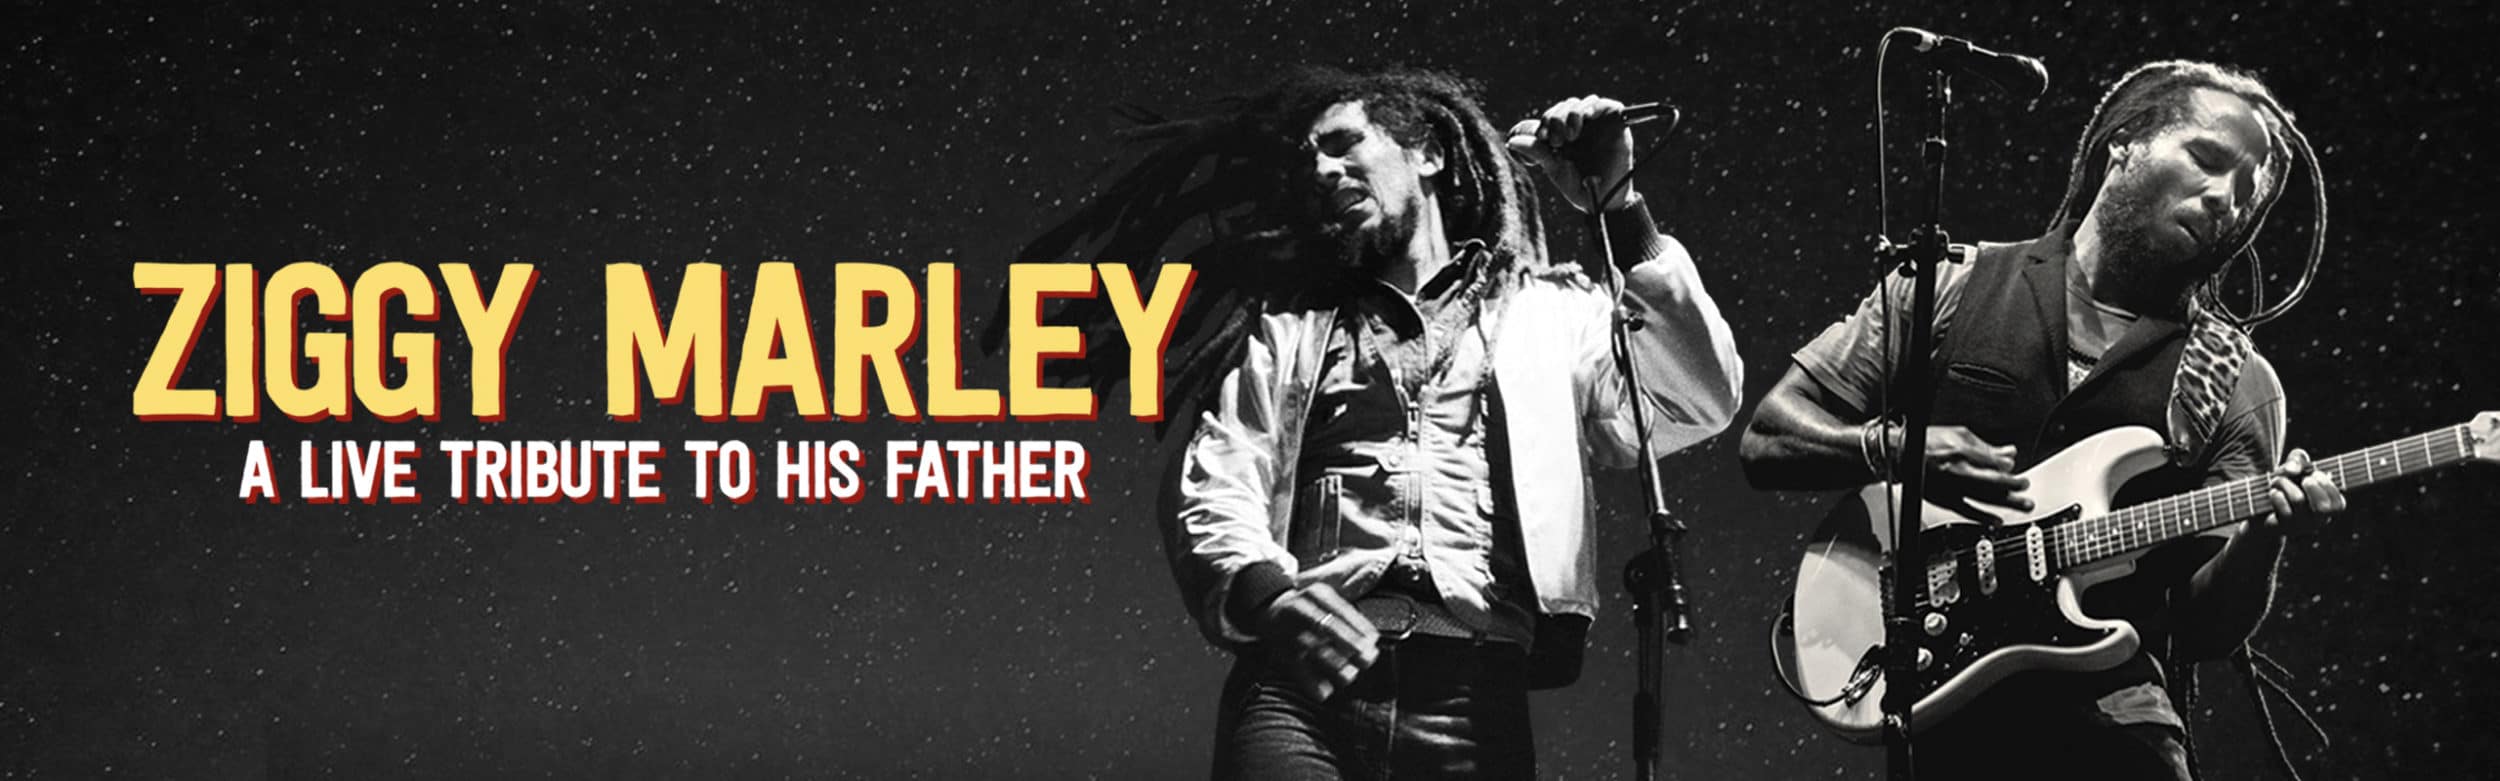 ZIGGY MARLEY – A Live Tribute to His Father